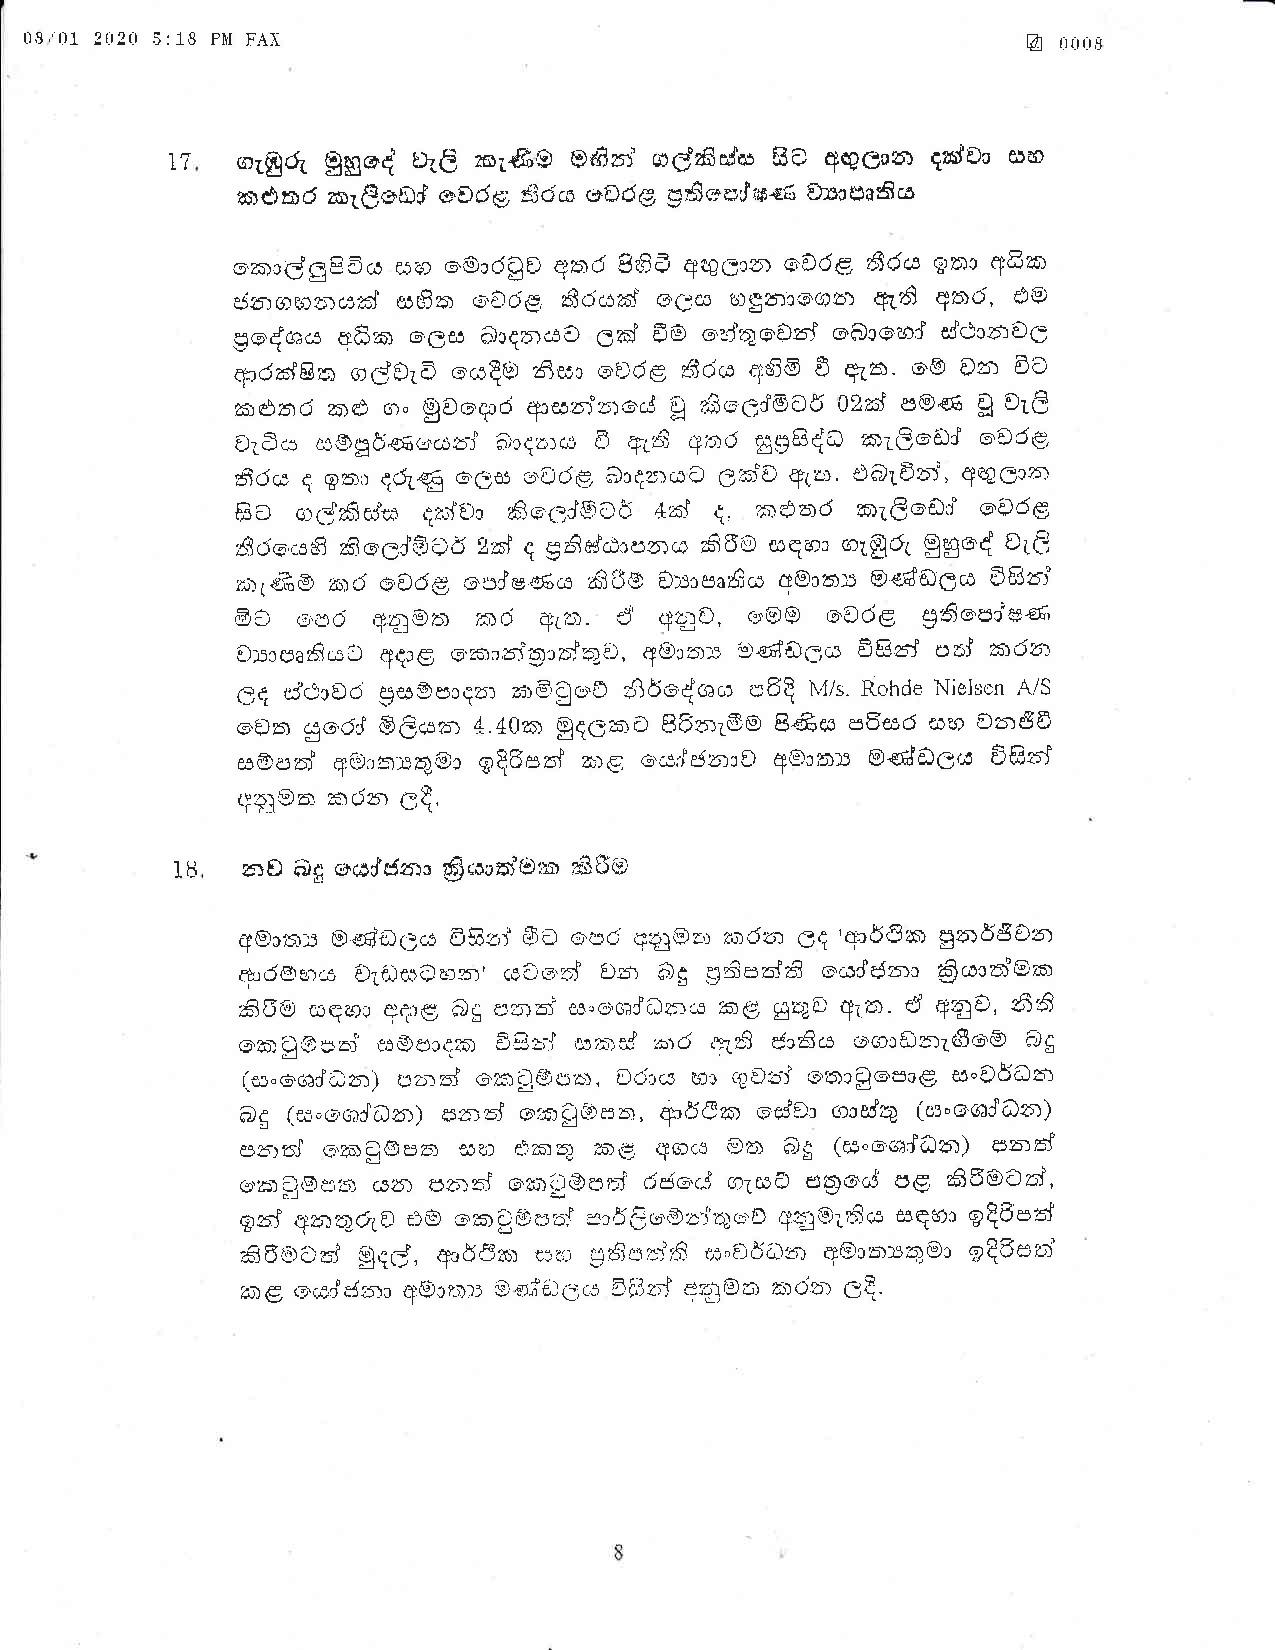 Cabinet Decision on 08.01.2020 page 008